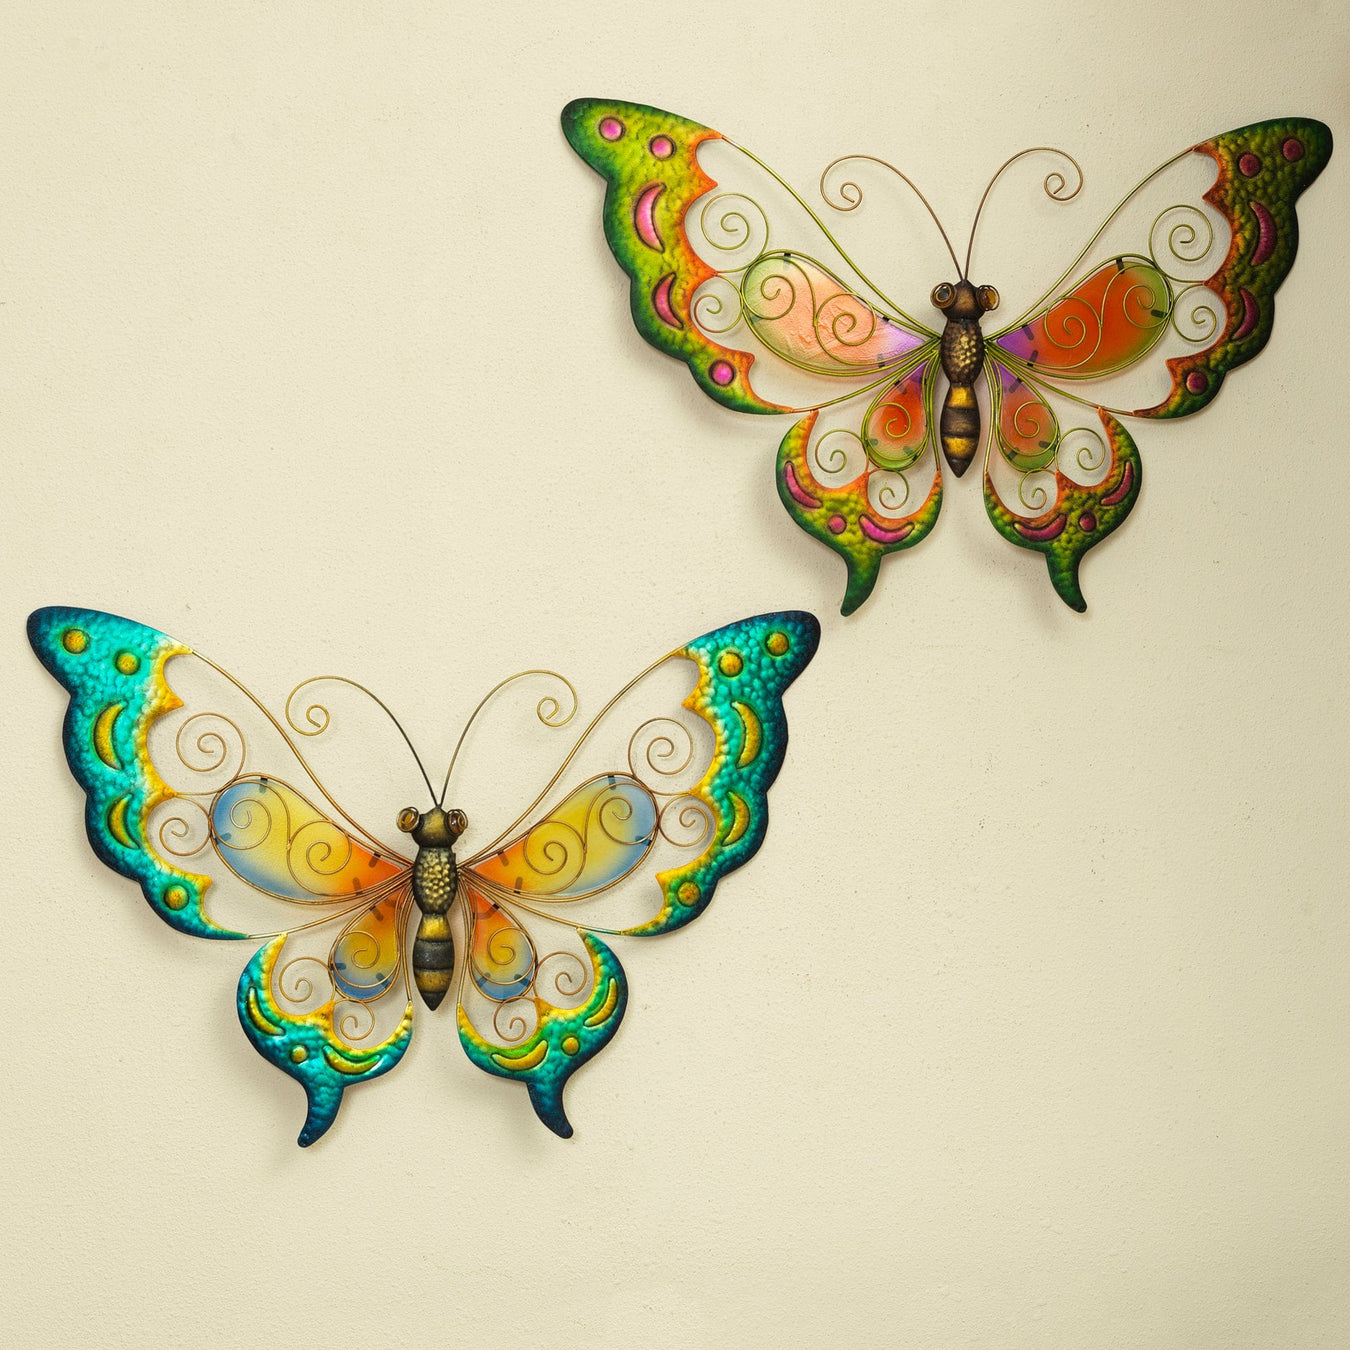 Signature HomeStyles Outdoor Wall Decor Artistic Tipped Metal Butterfly Wall Decor